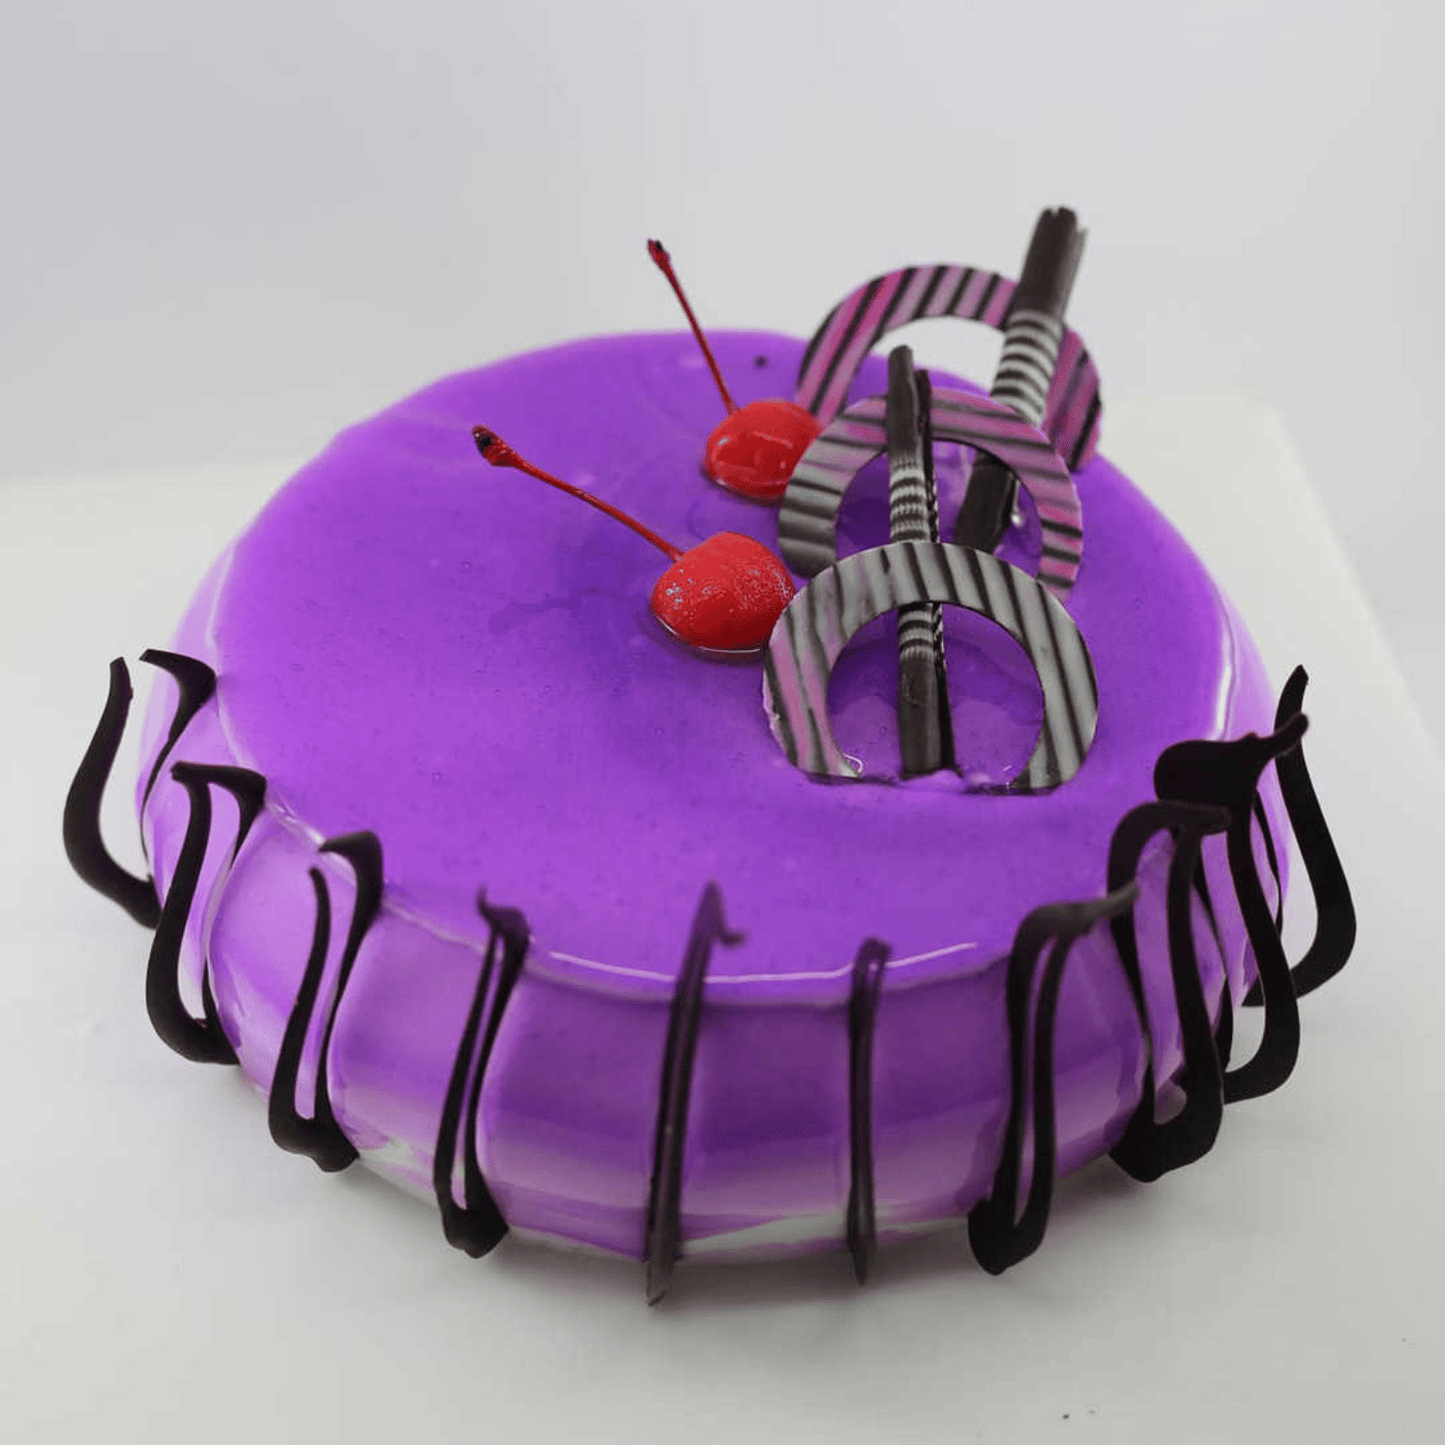 Sumptuous Blueberry Bliss Cake